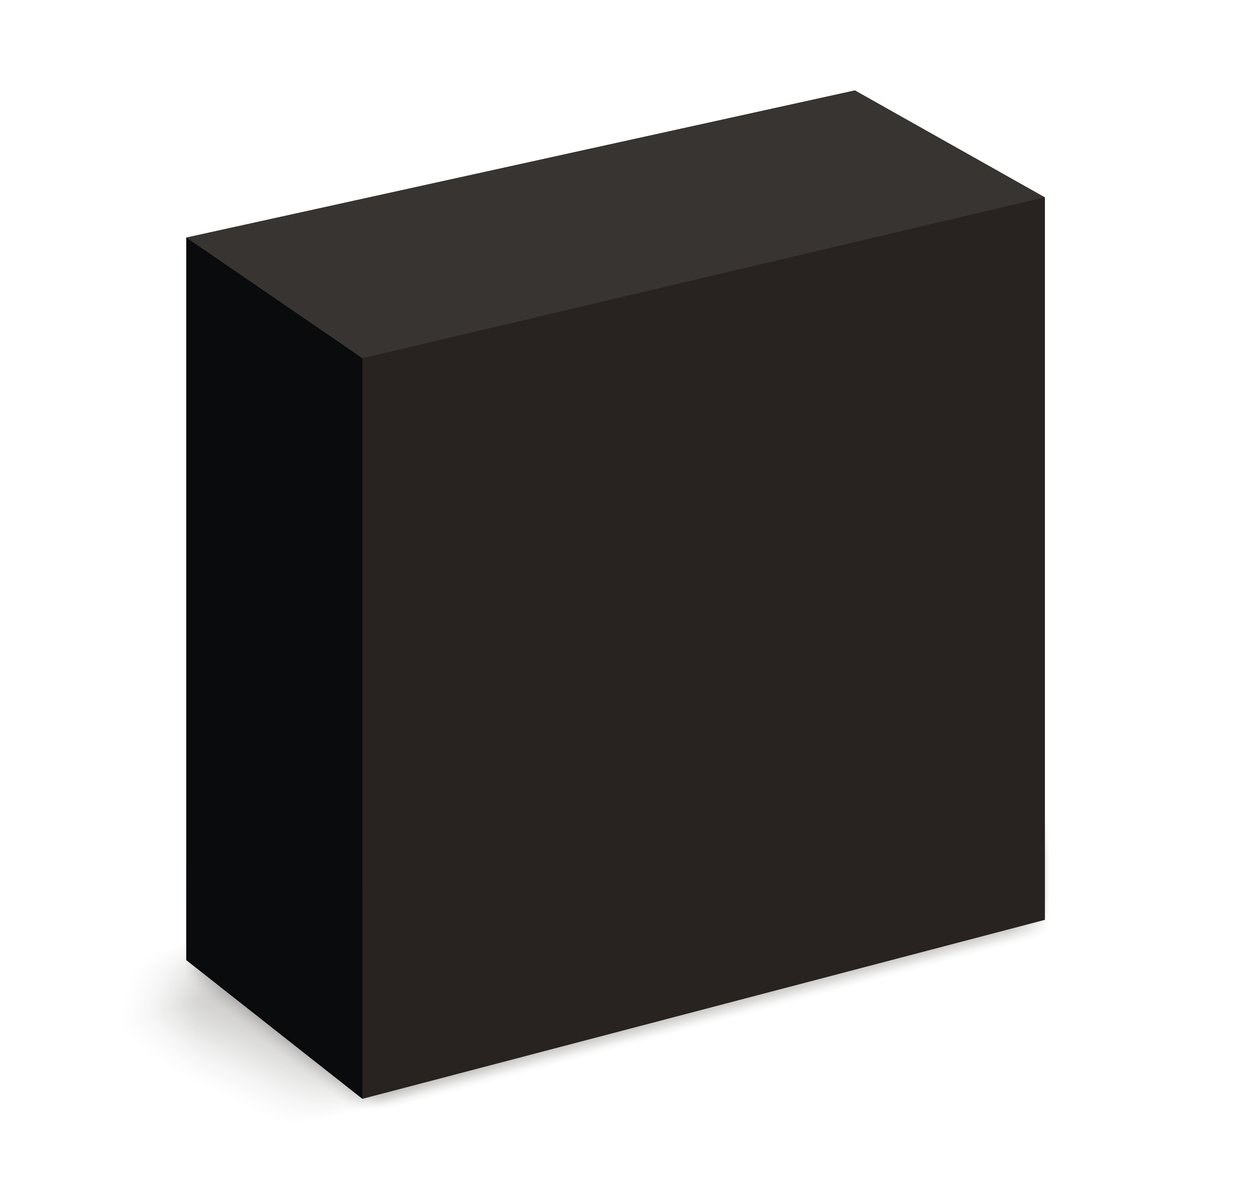 an object that is in a square shape